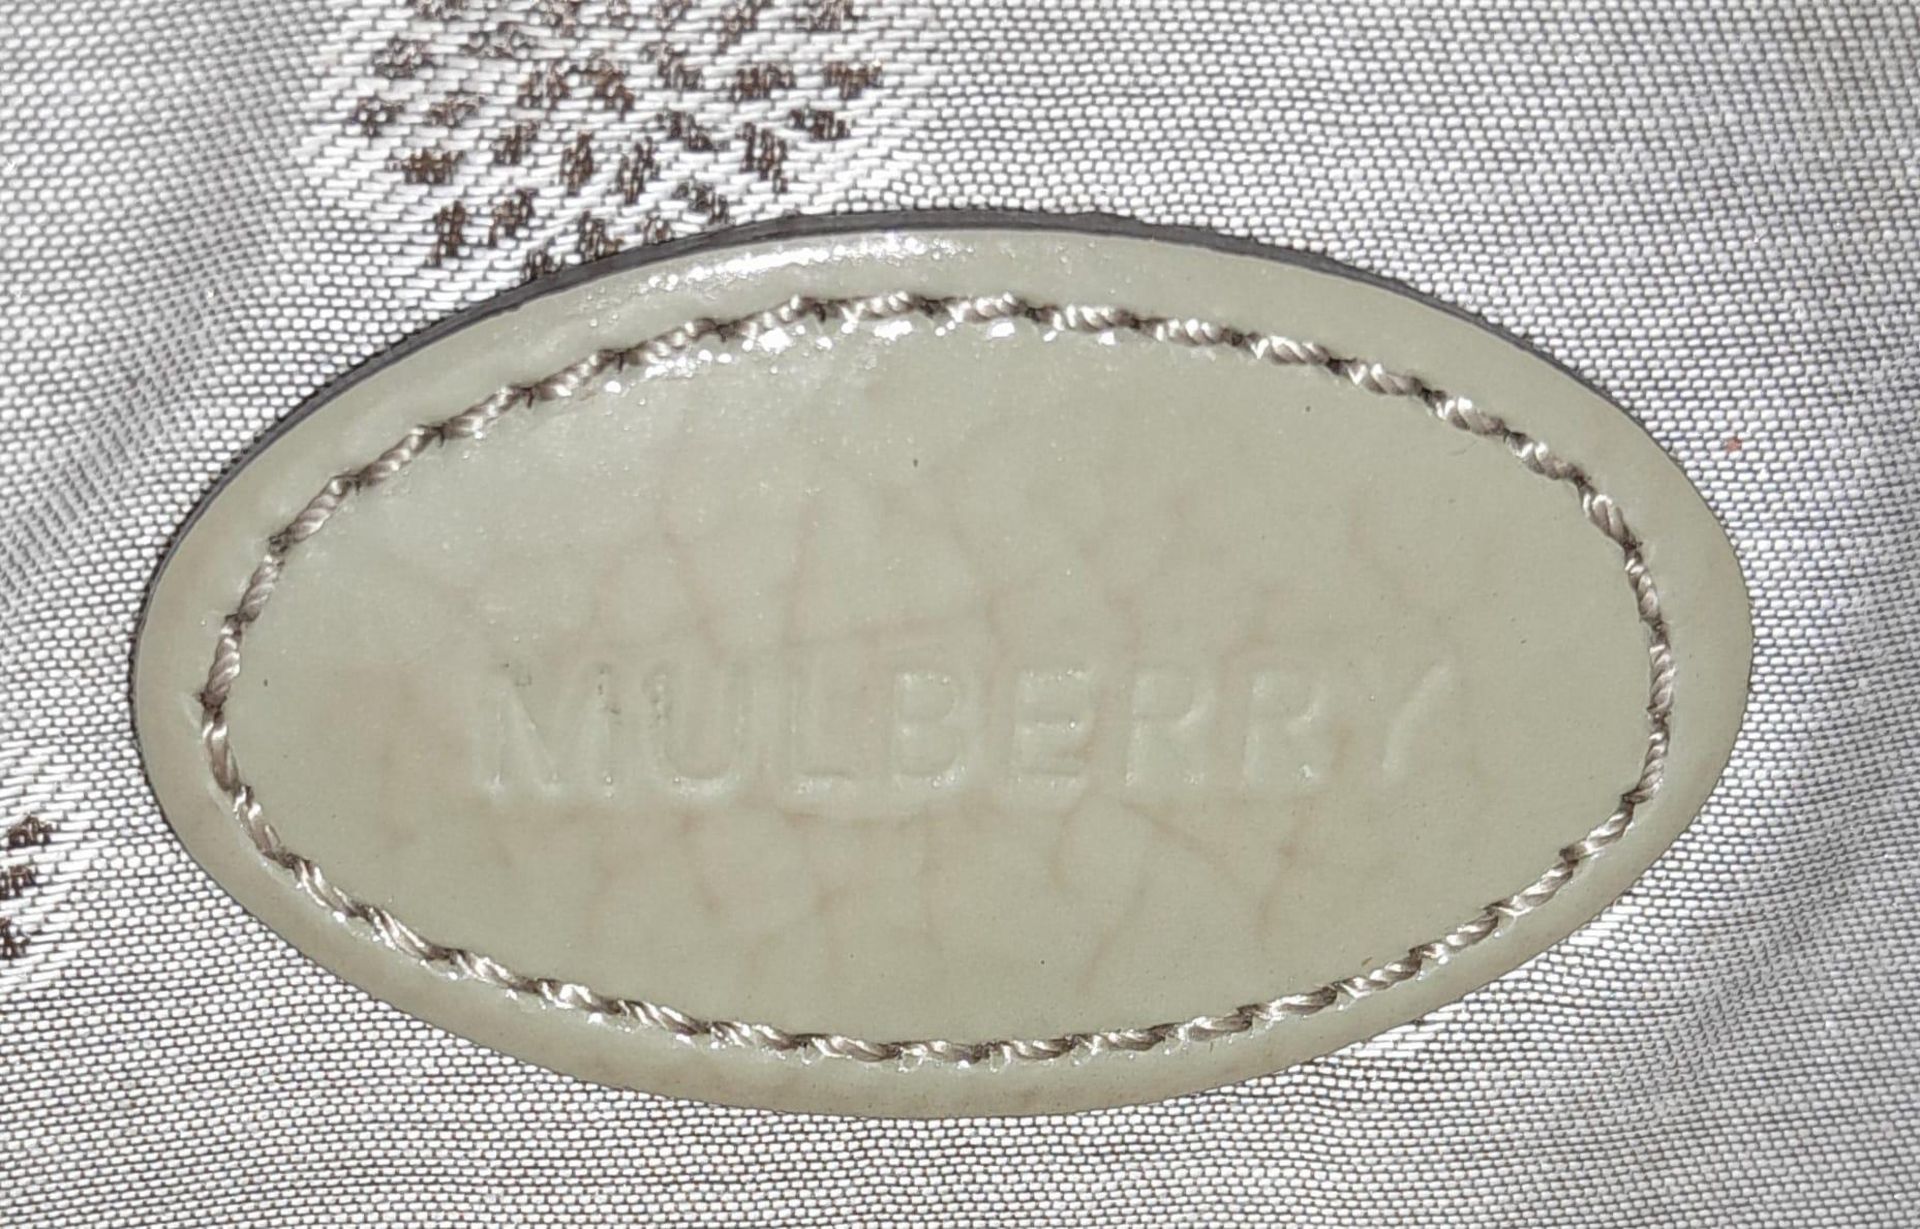 A Mulberry Harriet Khaki Leather Clutch Bag. Spongy patent leather exterior with gold-tone hardware, - Bild 9 aus 10